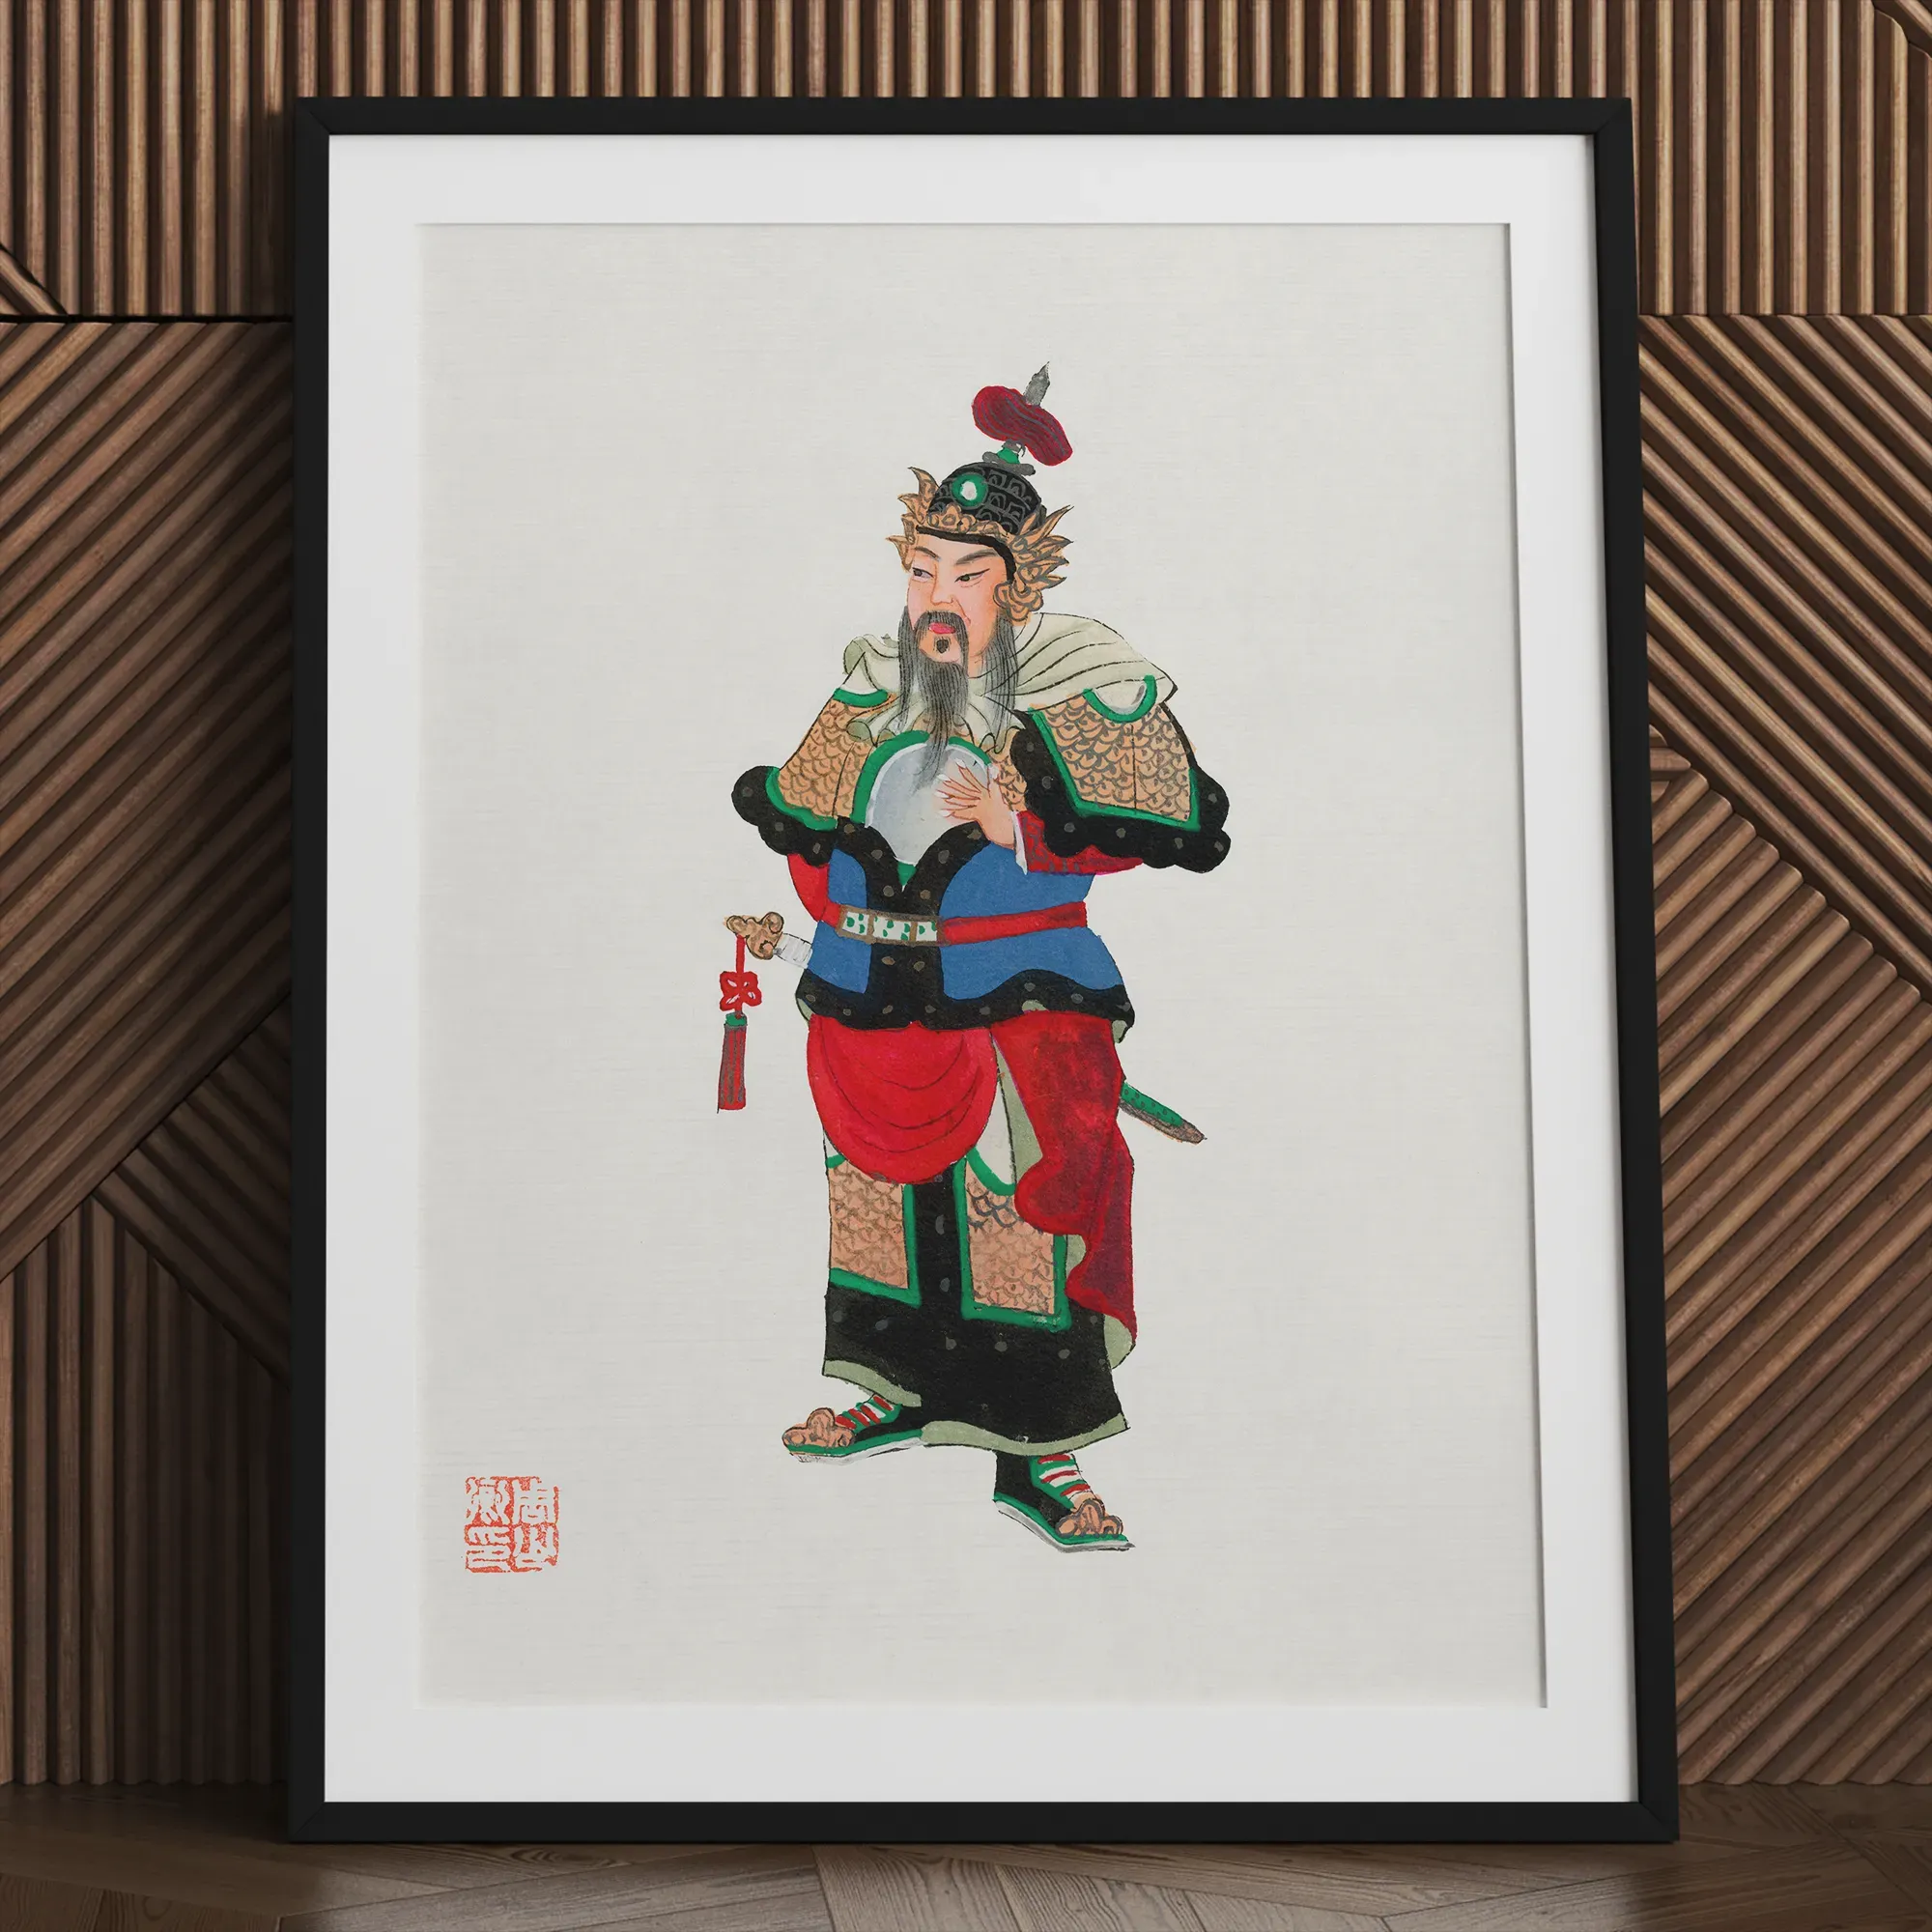 Chinese Military Commander Framed & Mounted Print - Posters Prints & Visual Artwork - Aesthetic Art